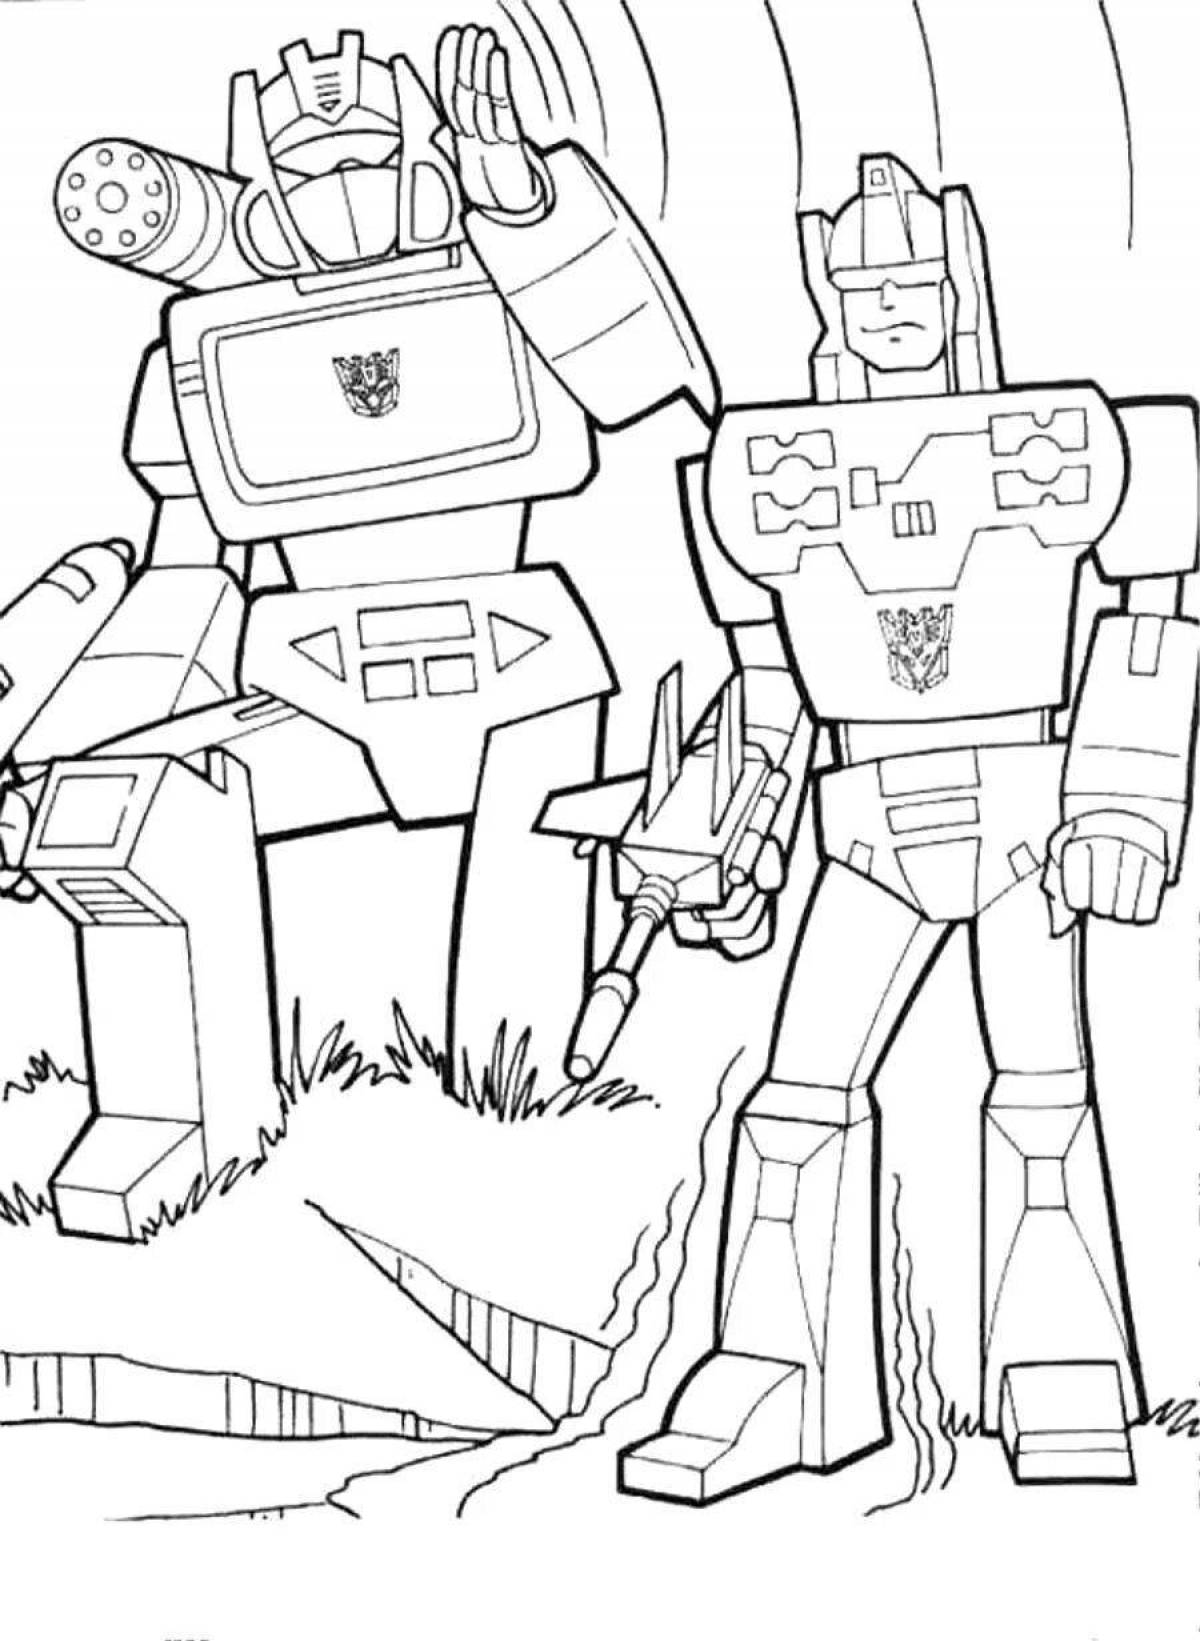 Colored transformers coloring pages for children 6-7 years old